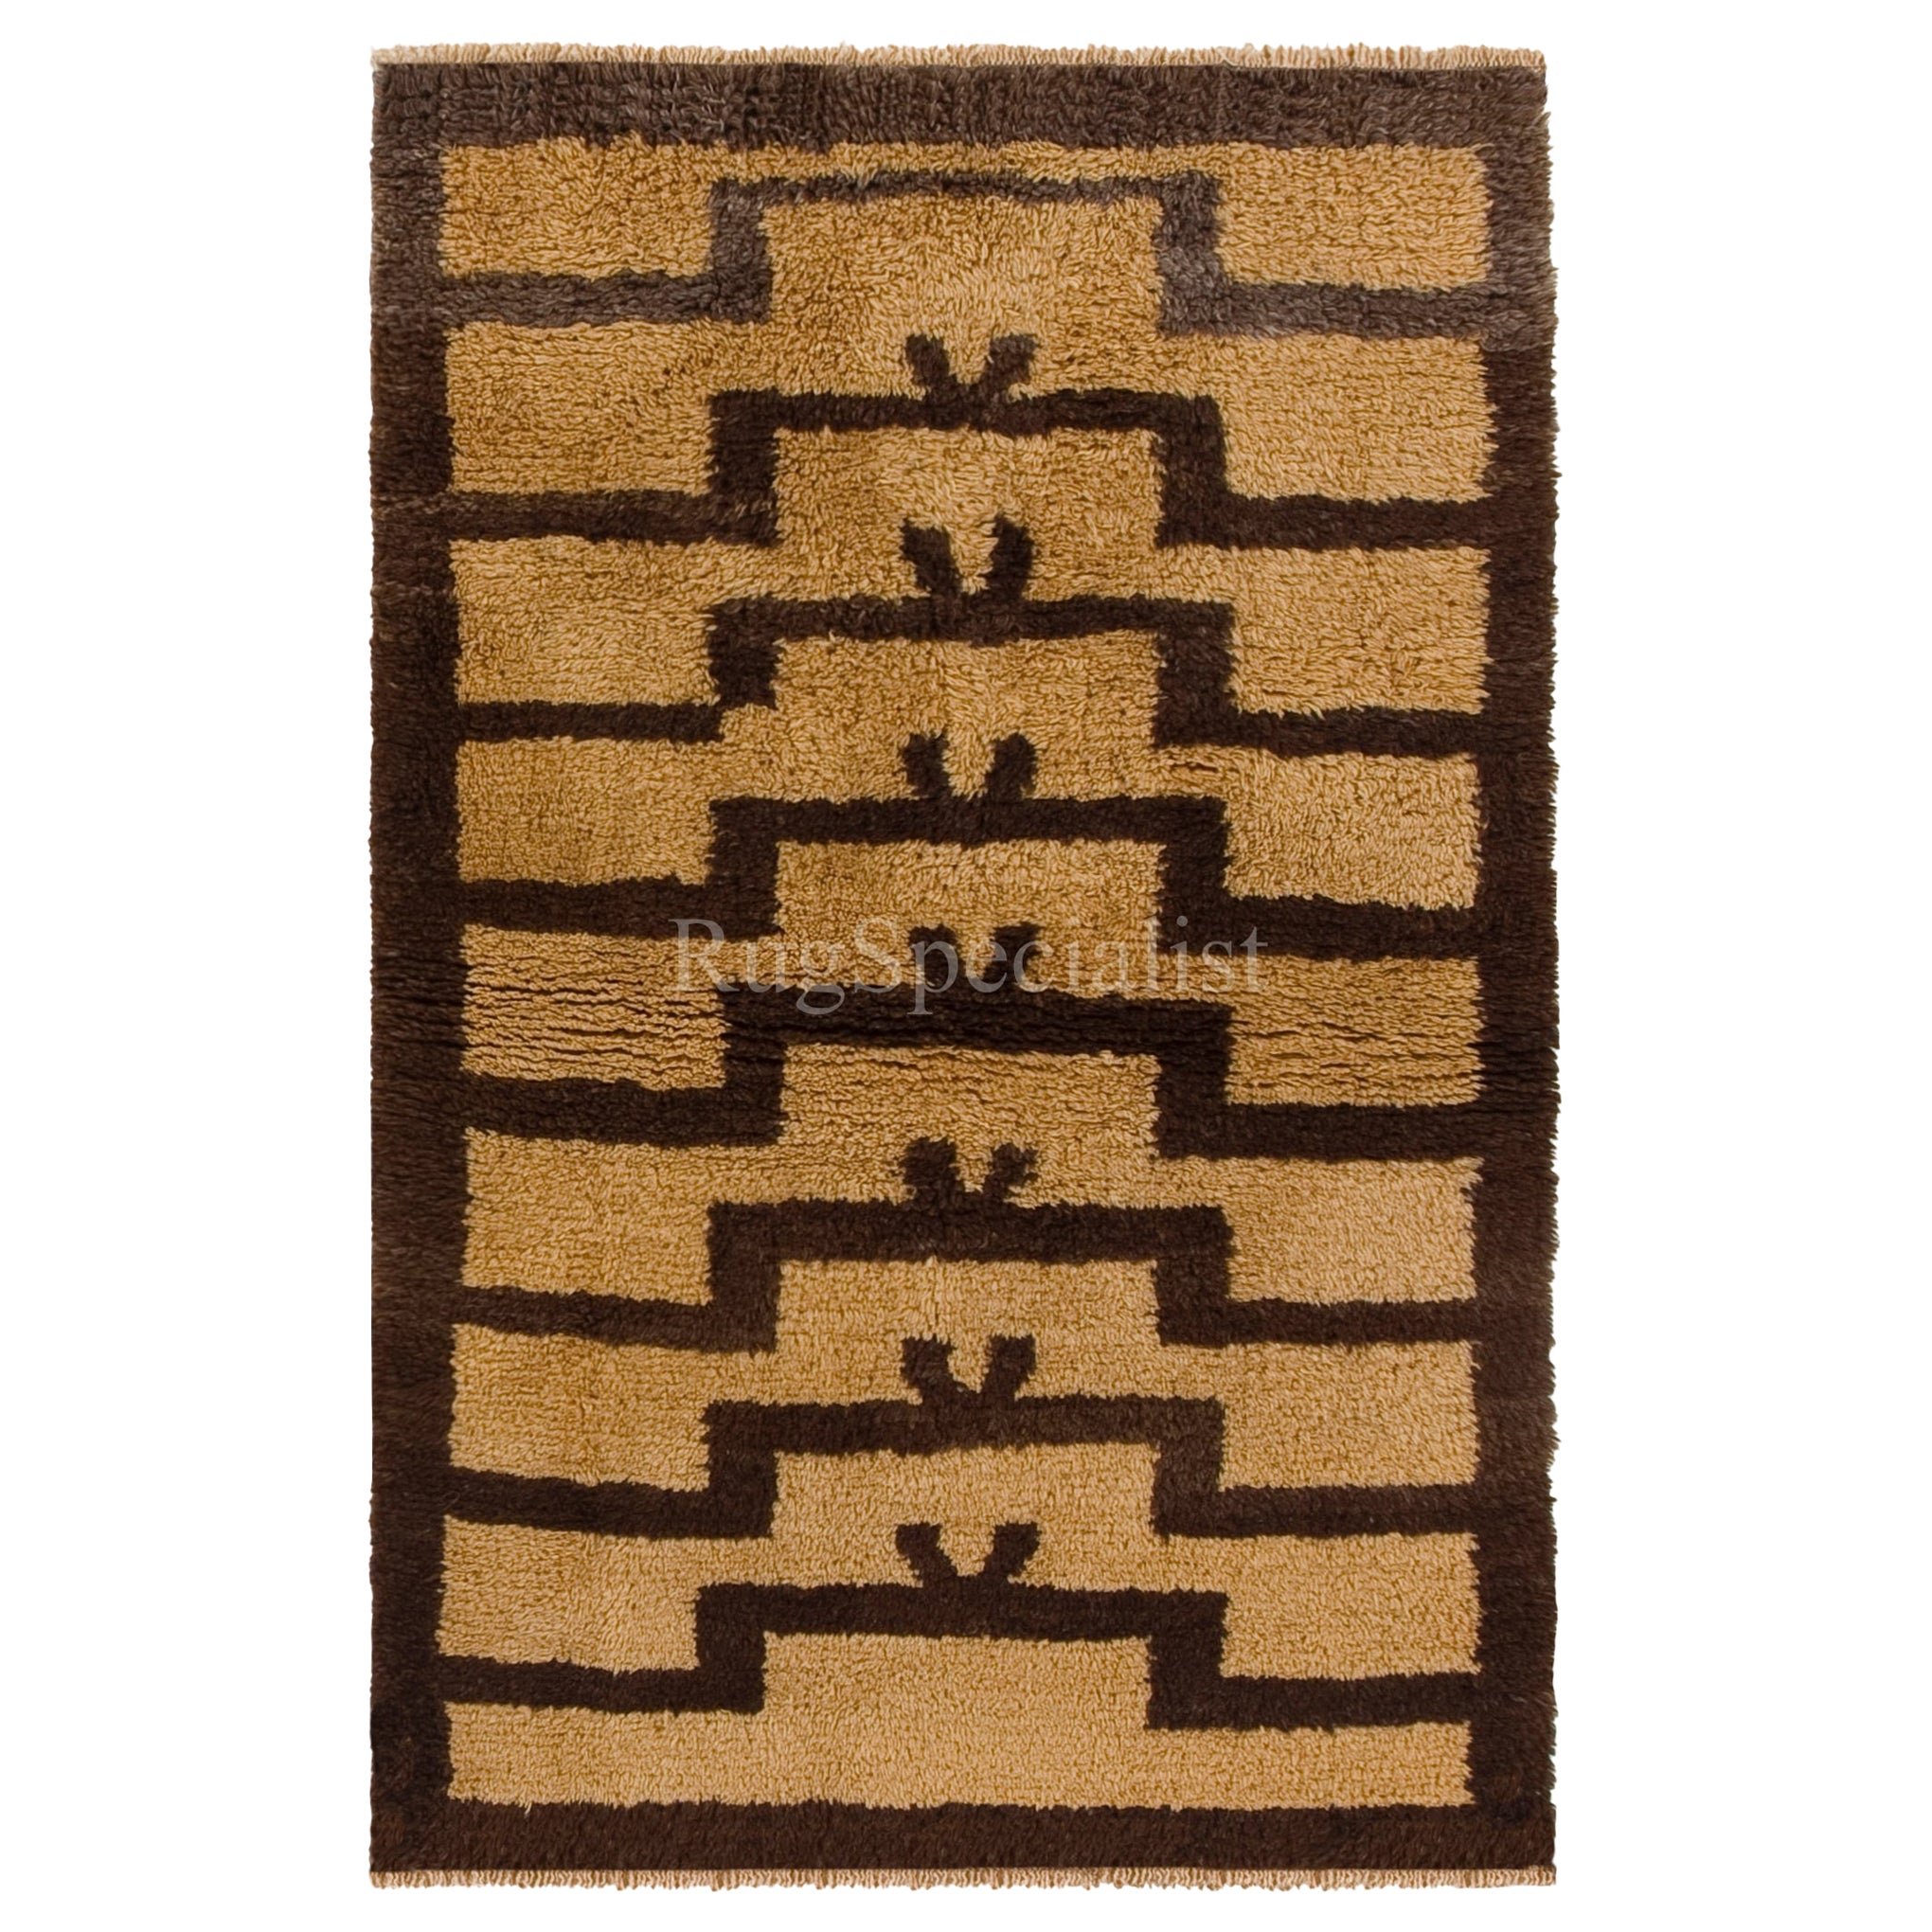 Hand-Knotted Anatolian Tulu Rug with Ascending Arches in Mustard & Brown Colors